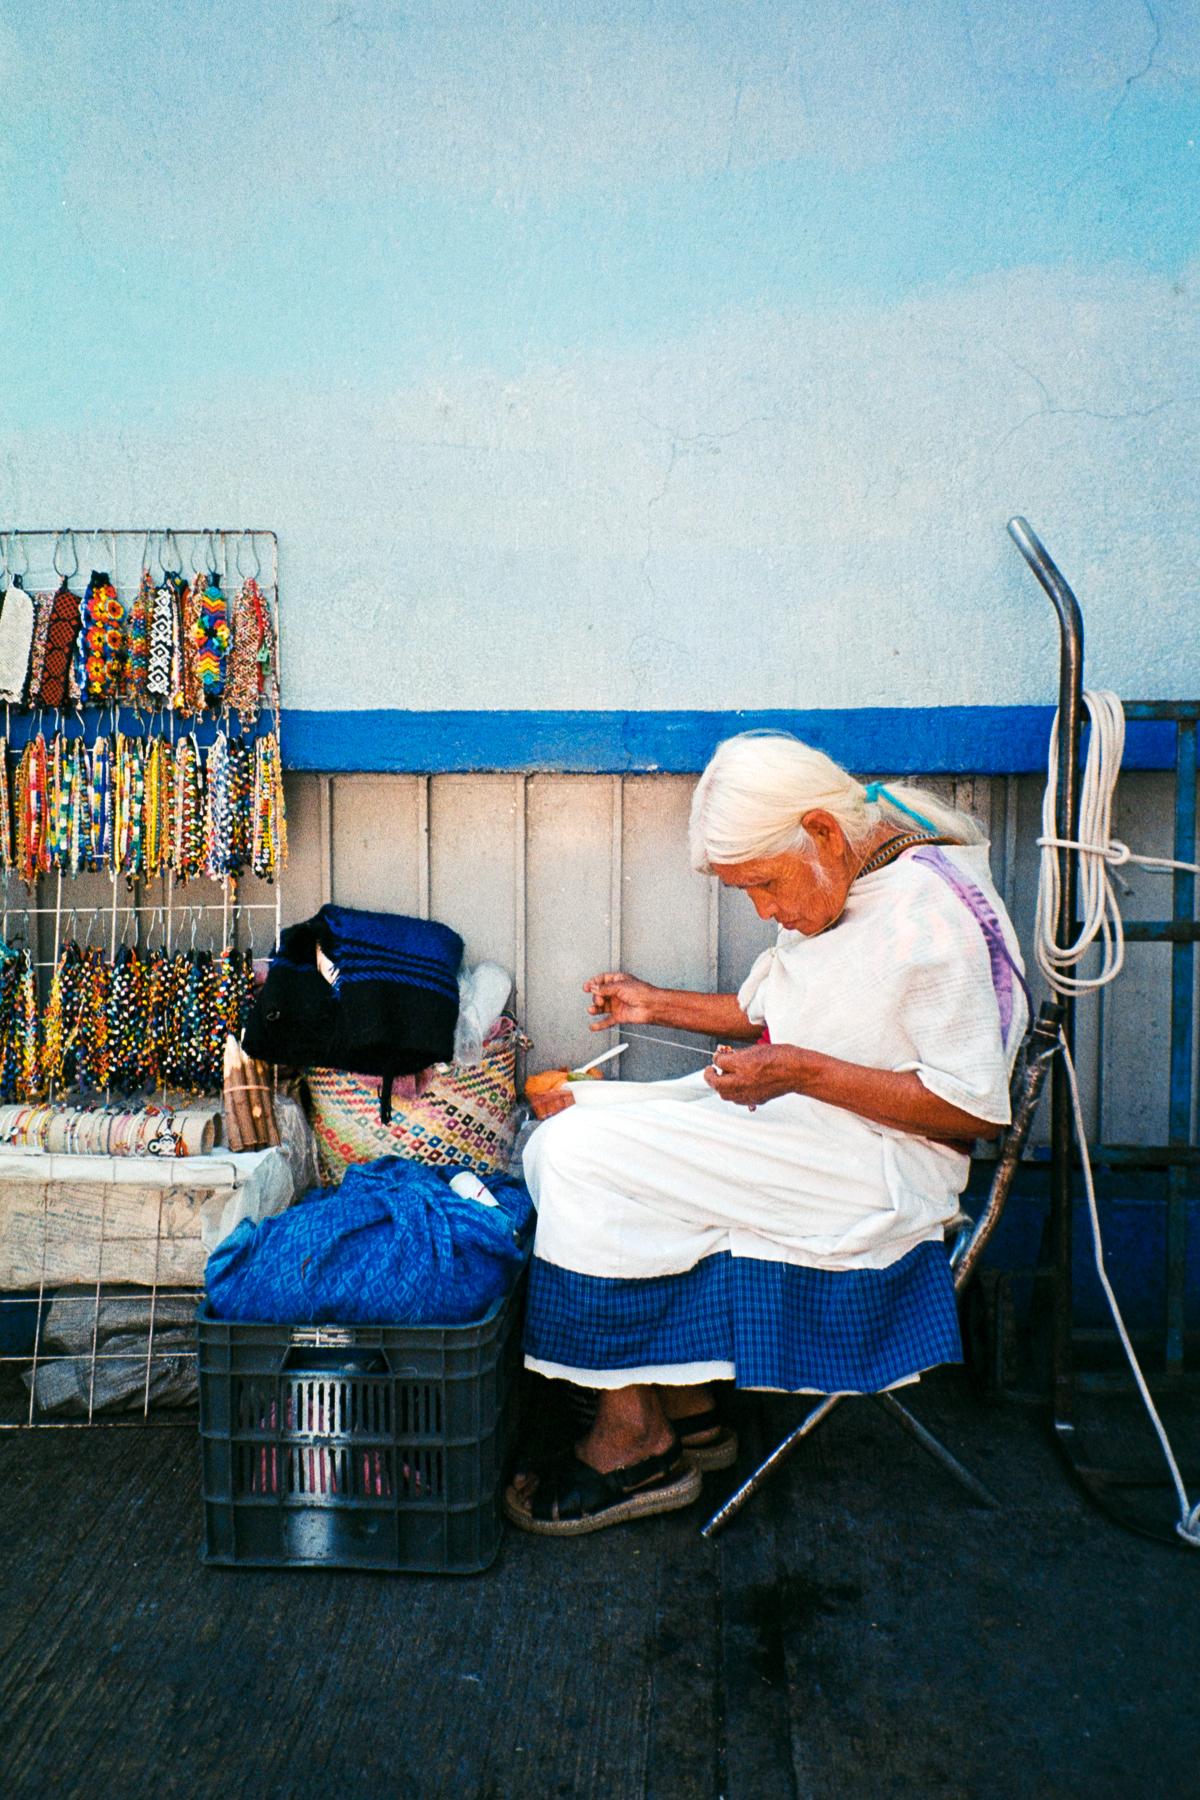 analog street photograph of a elderly lady making beadwork on her street vending stand in Mexico City